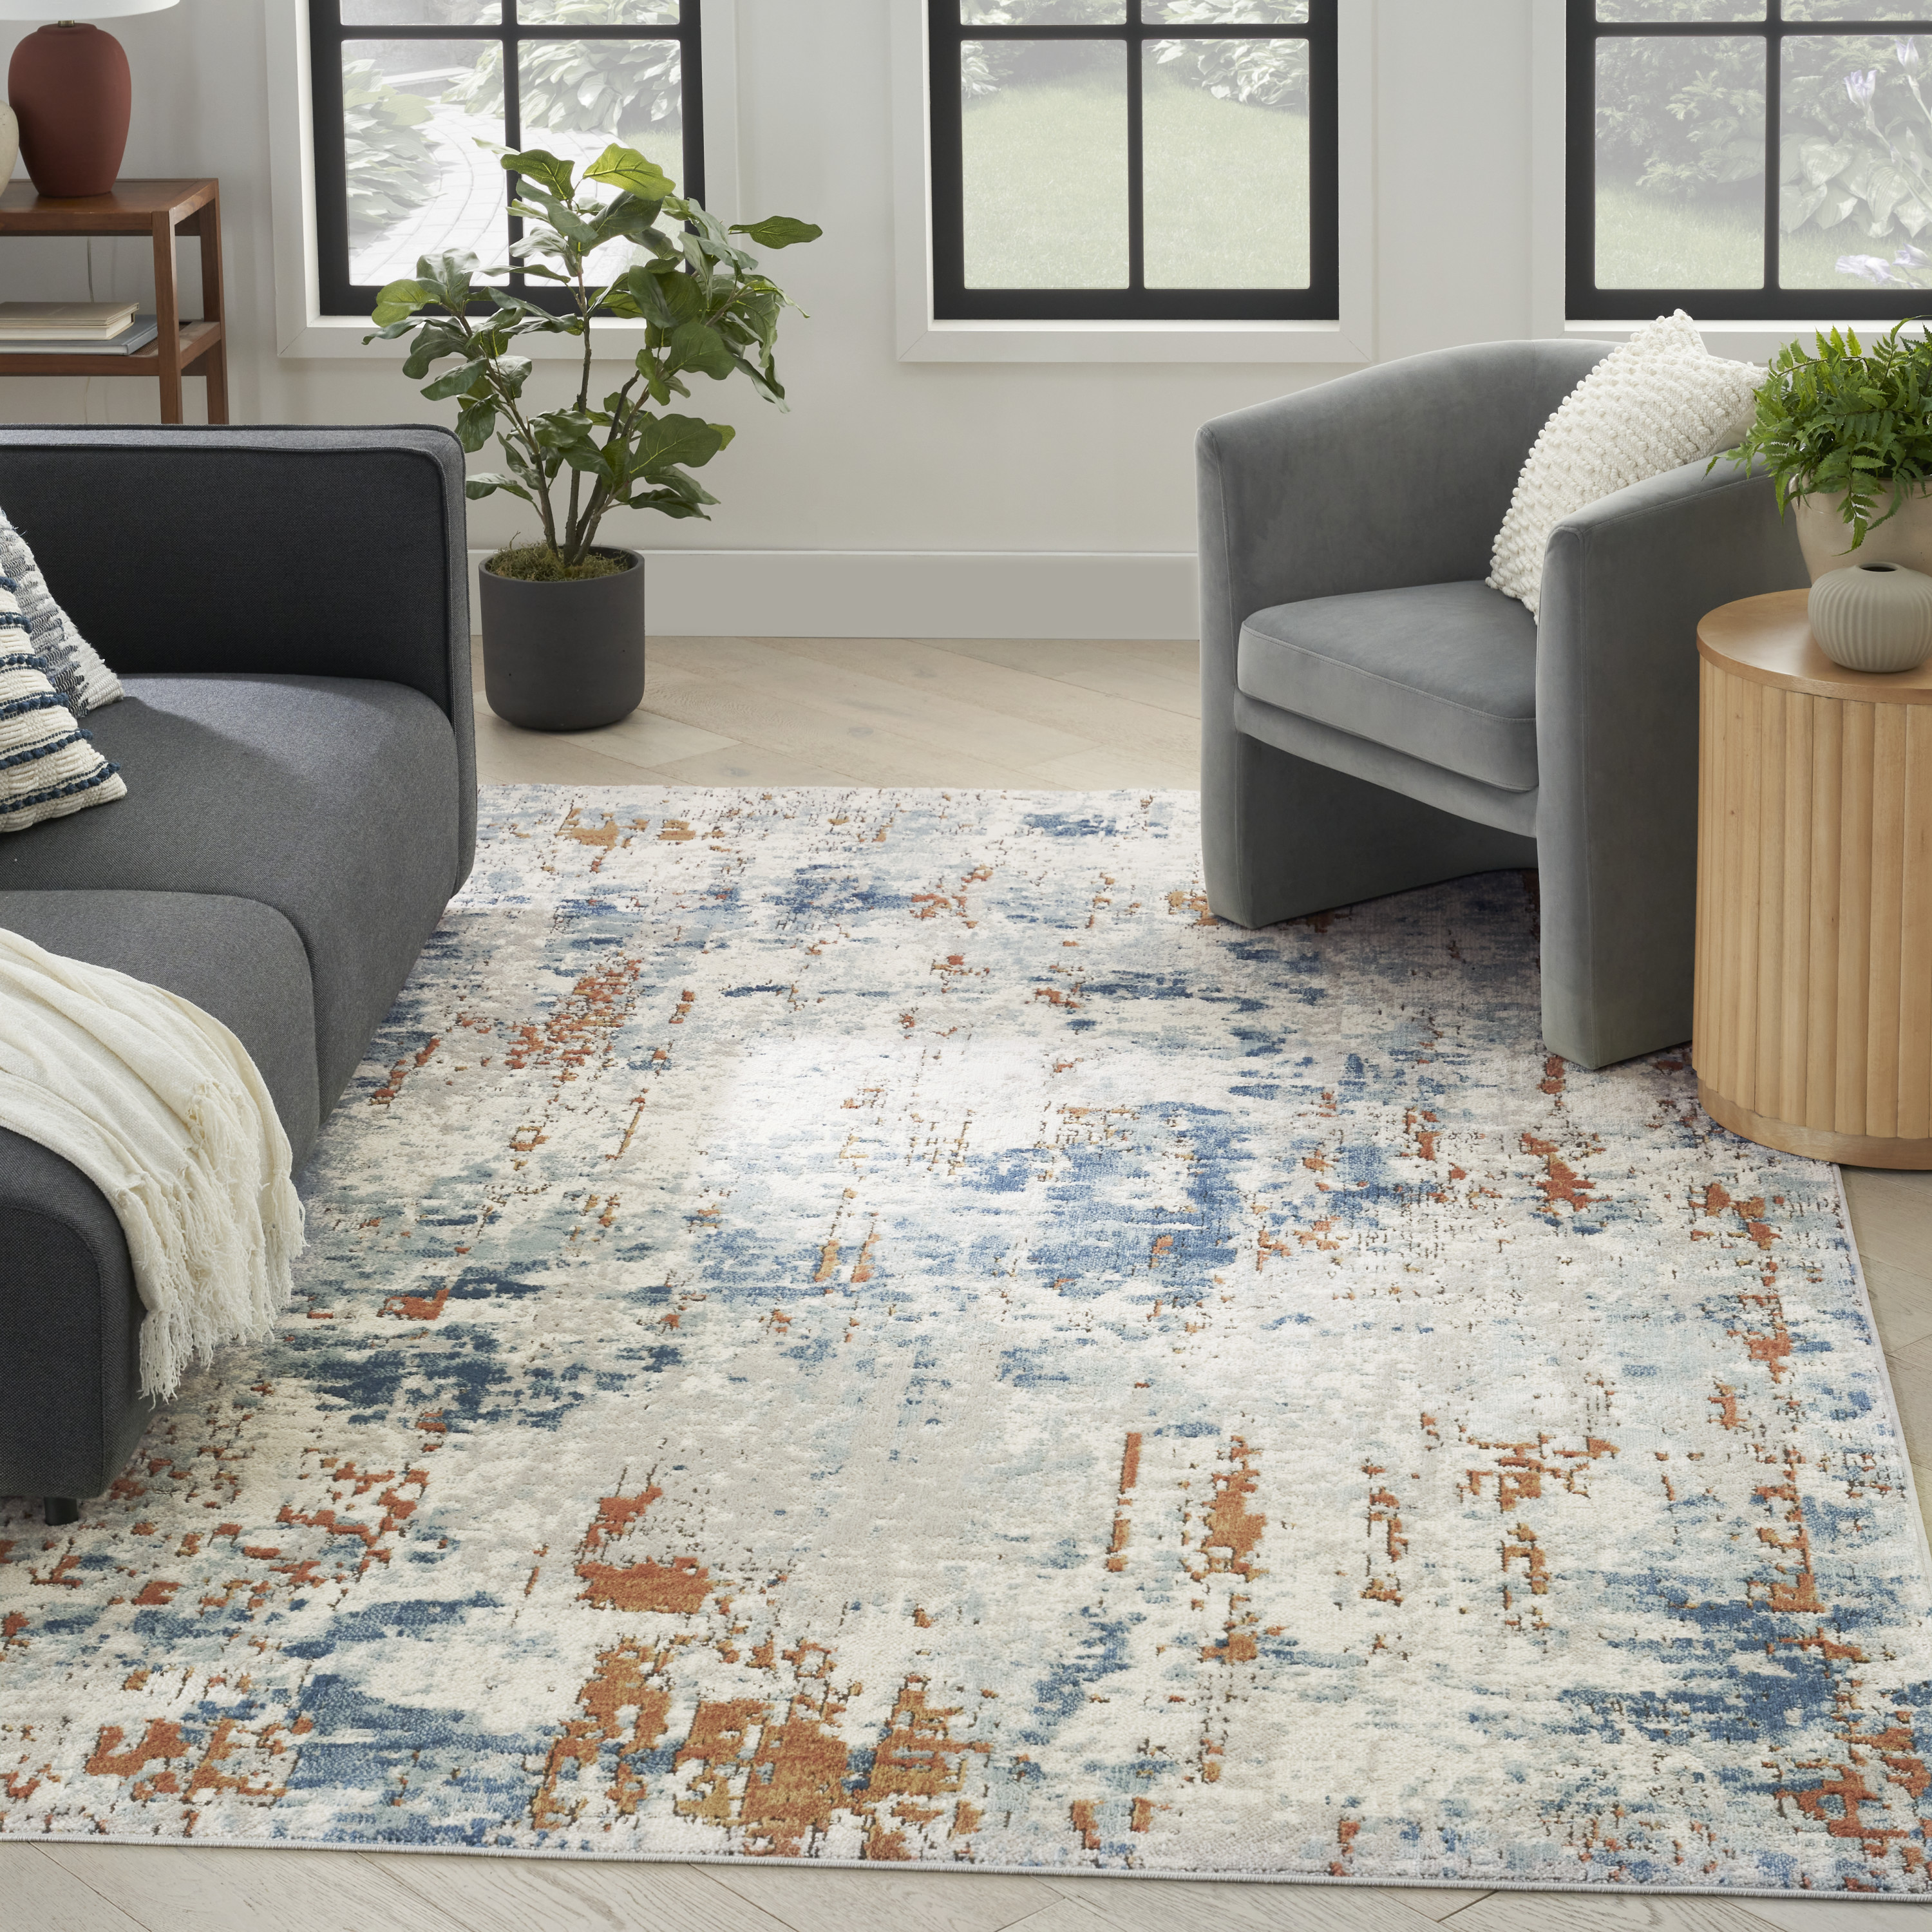 Nourison Concerto Abstract Beige Blue Rust 5'3" x 7'3" Area Rug, (5x7) - image 1 of 8